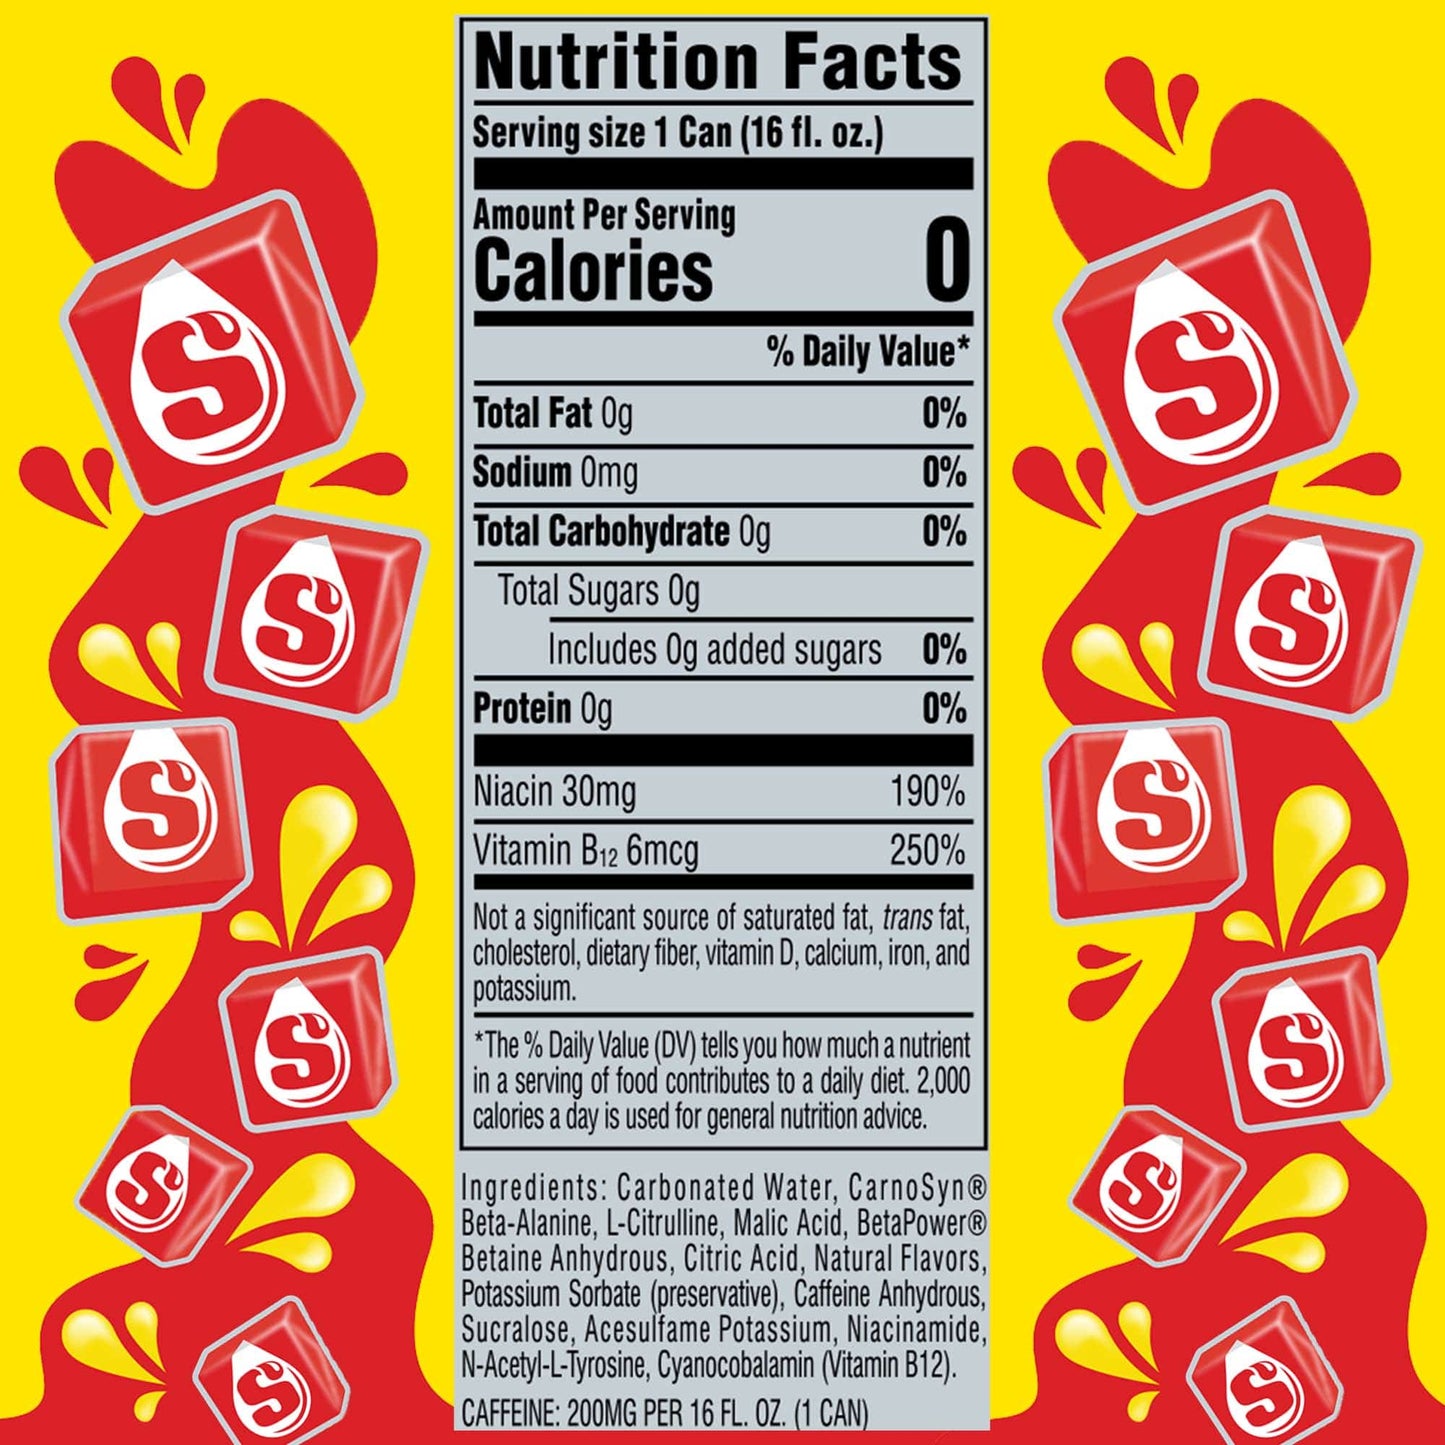 C4 ENERGY X STARBURST CANDY Nutrition Facts.